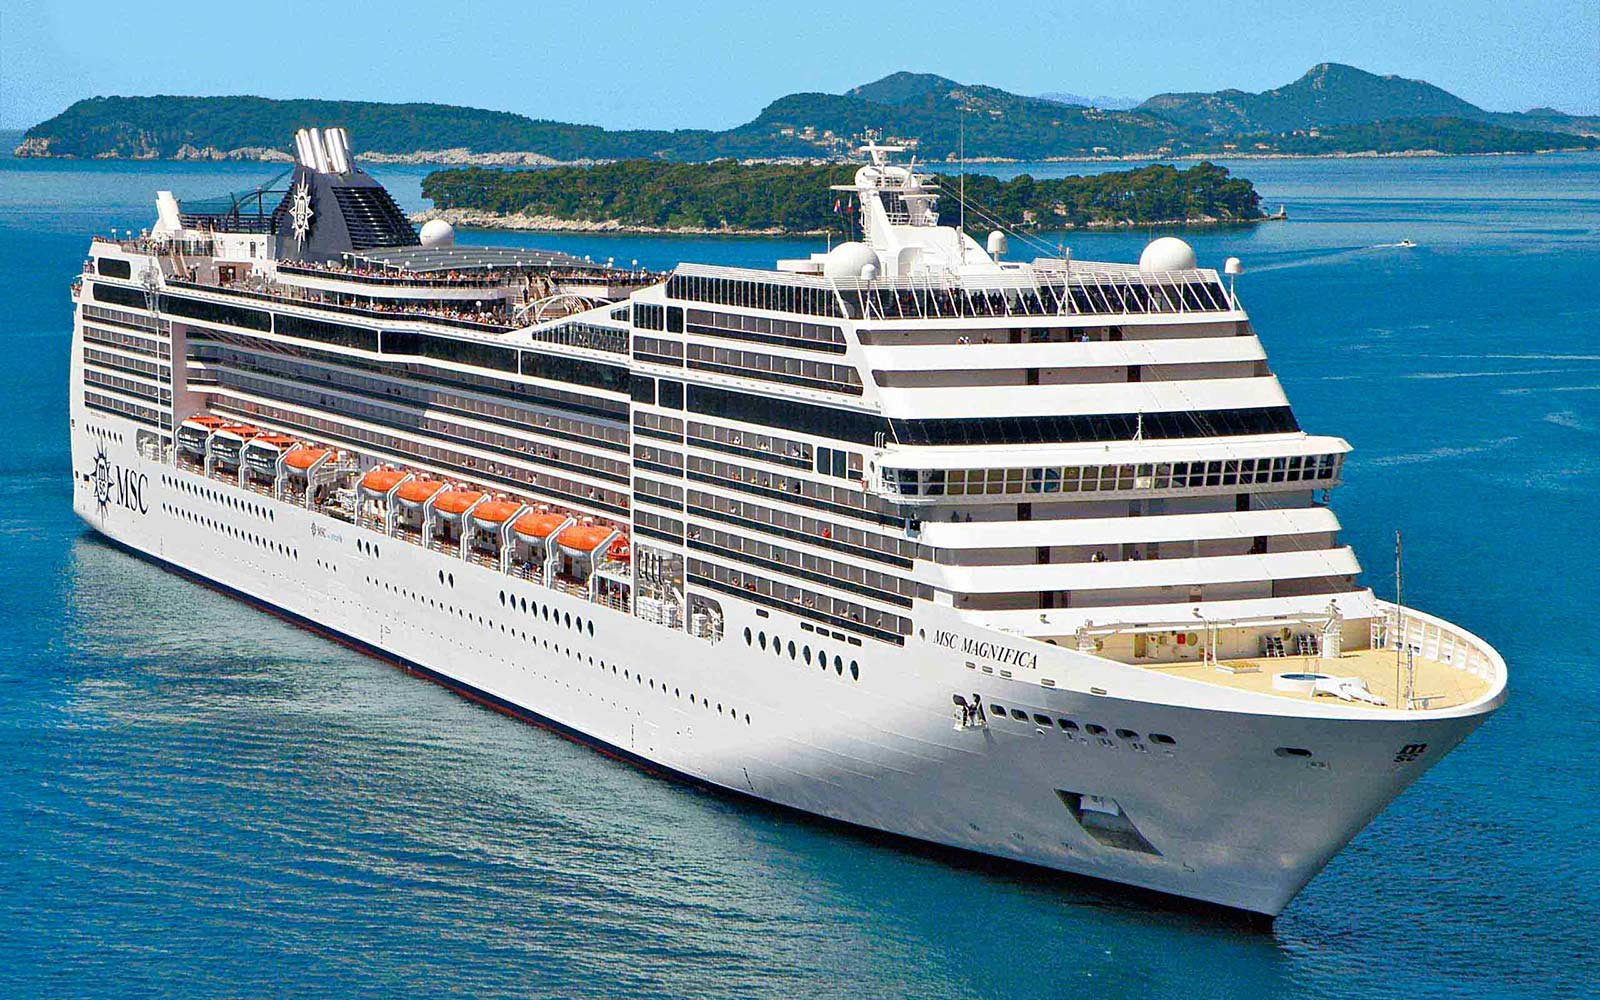 round the world cruise offers